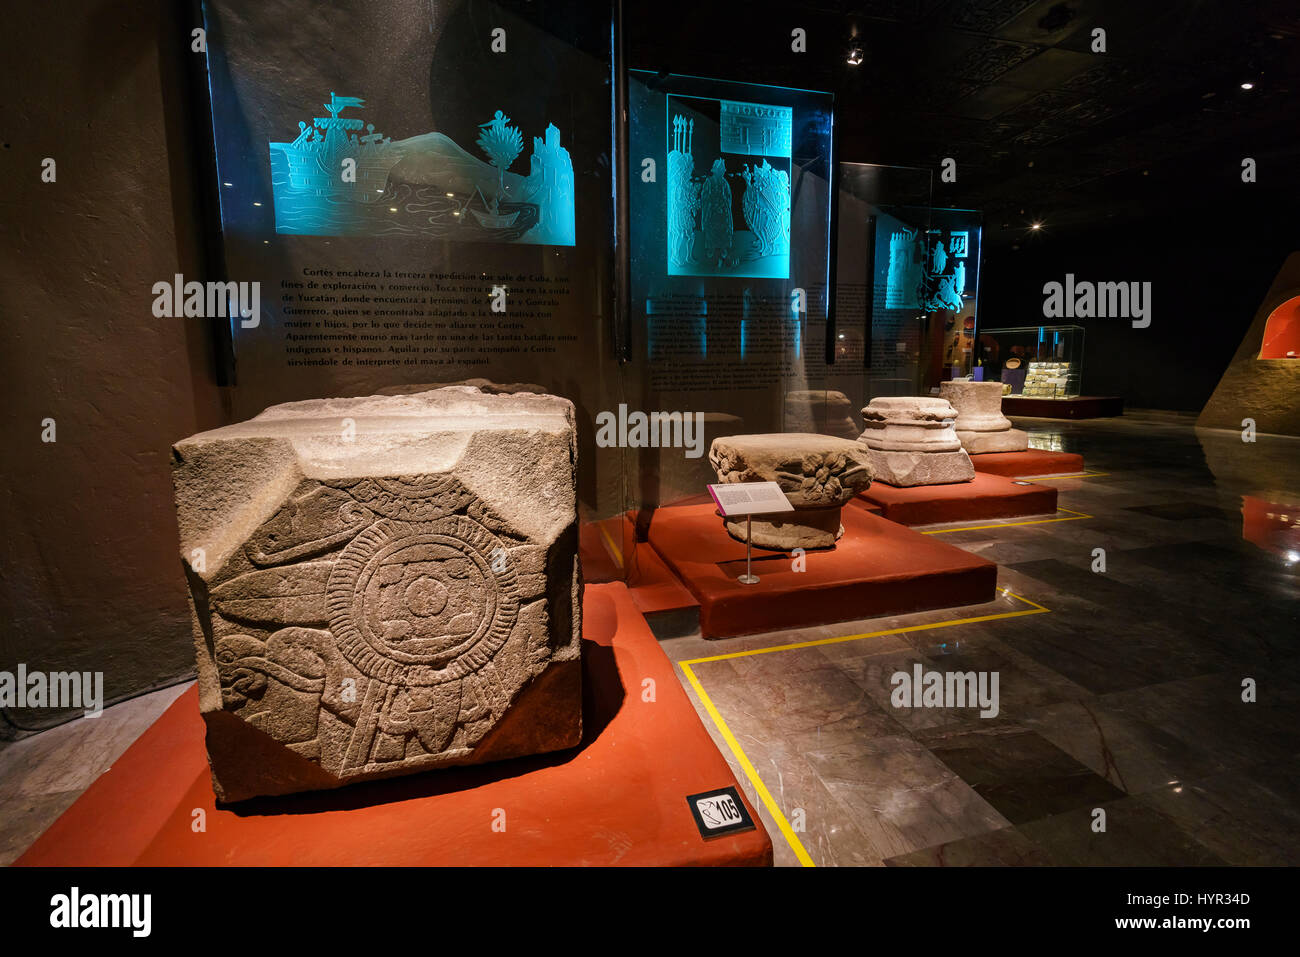 Mexico City, FEB 19: The inner view of the historical and beautiful Templo Mayor Museum on FEB 19, 2017 at Mexico City Stock Photo